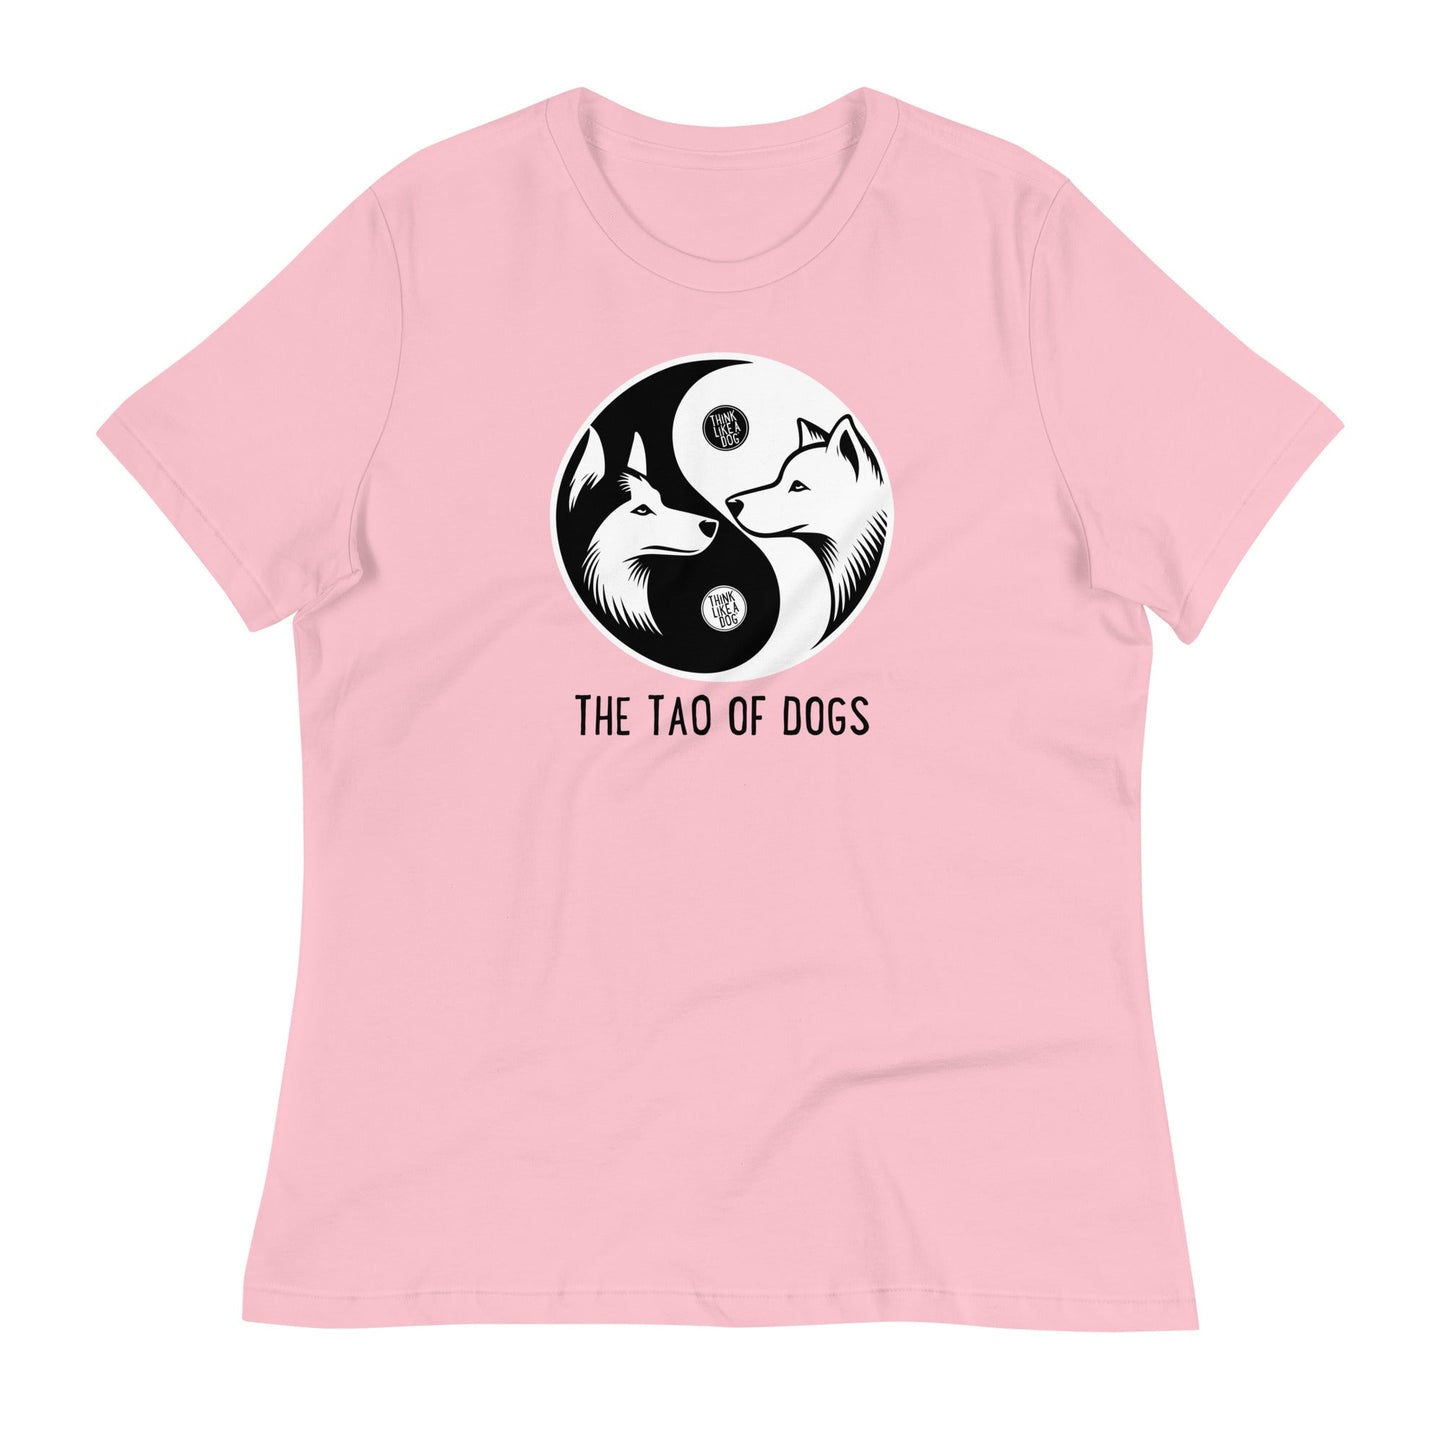 Women's Relaxed T-Shirt The Tao Of Dogs - THiNK LiKE A DOG®